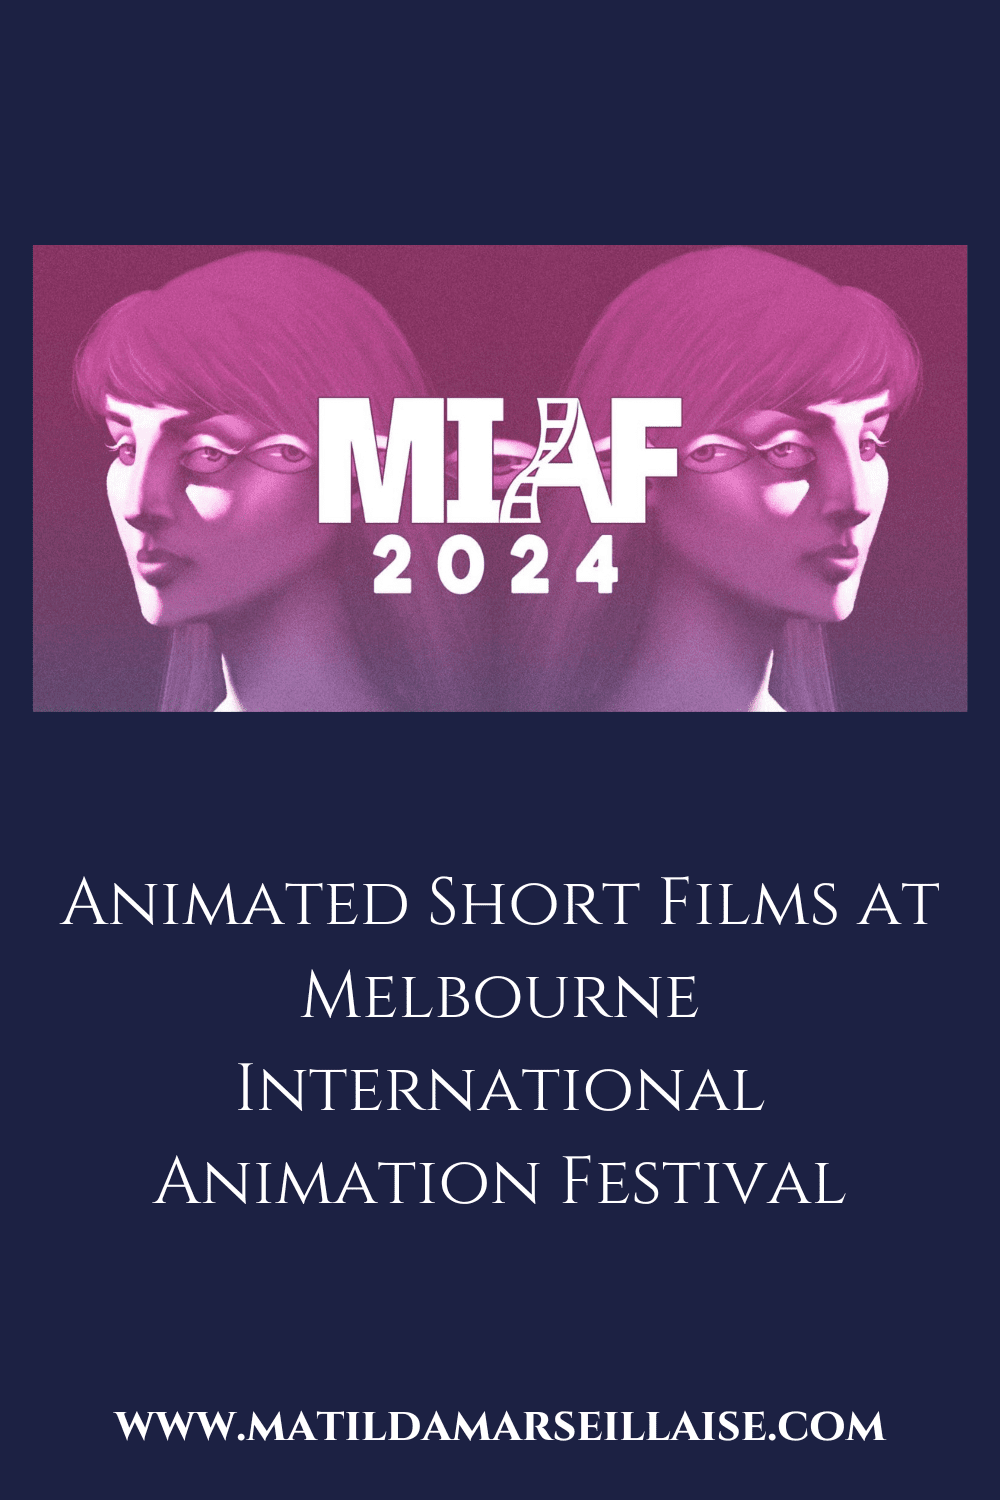 18 French language shorts to see at Melbourne International Animation Festival